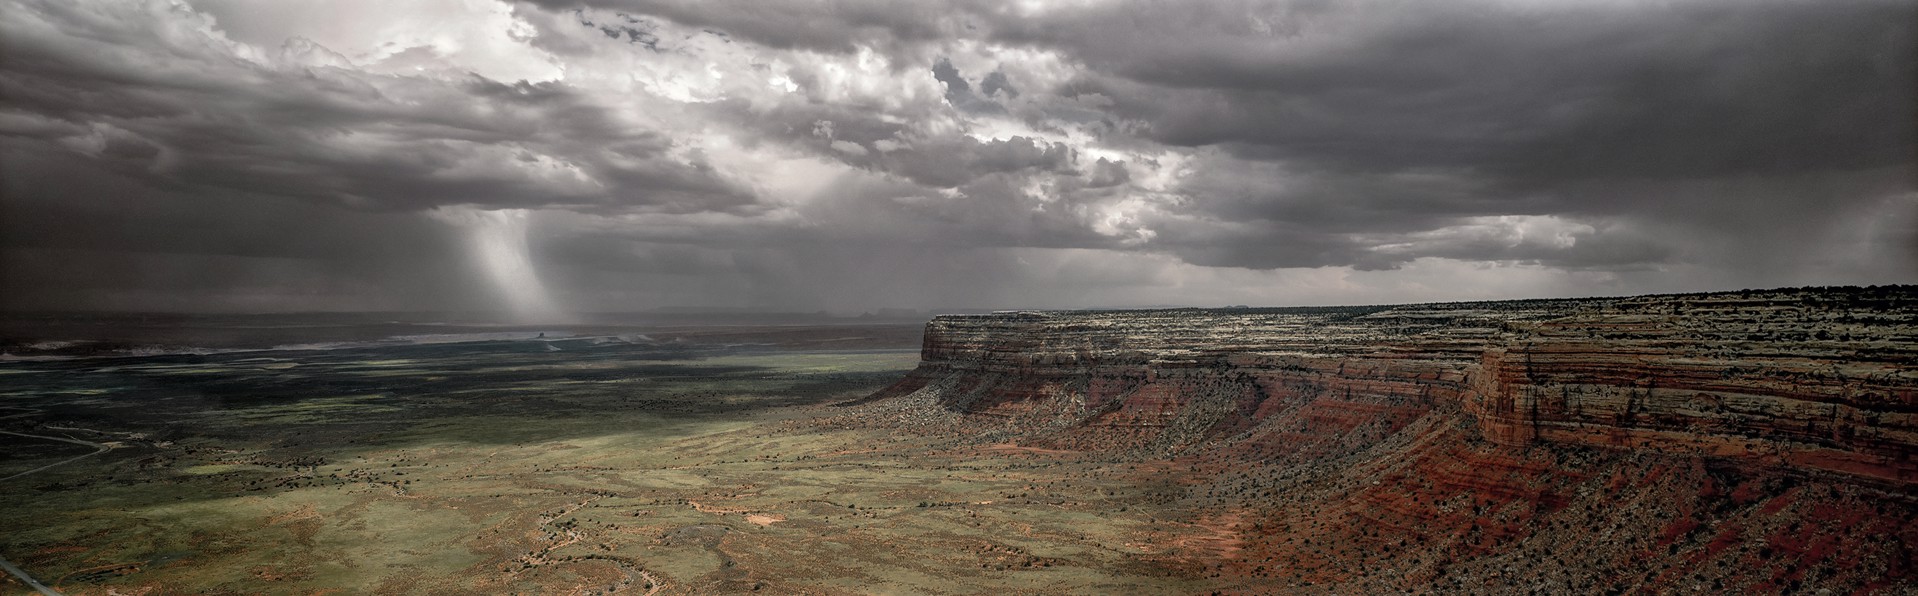 Thunderstorms Moving In, Top of Mokie Dugway, Route 261, Utah by Lawrence McFarland